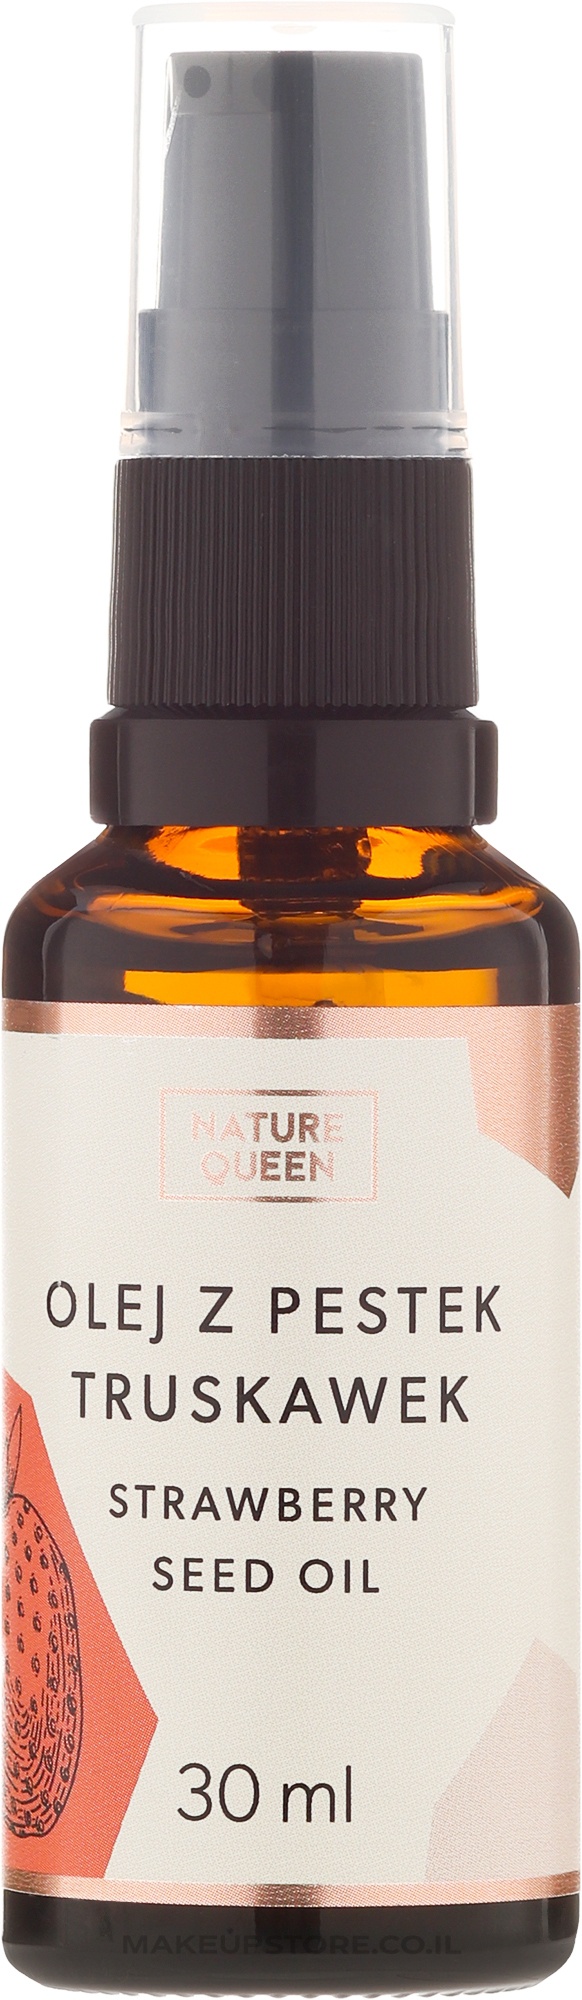 Nature Queen Strawberry Seed Oil